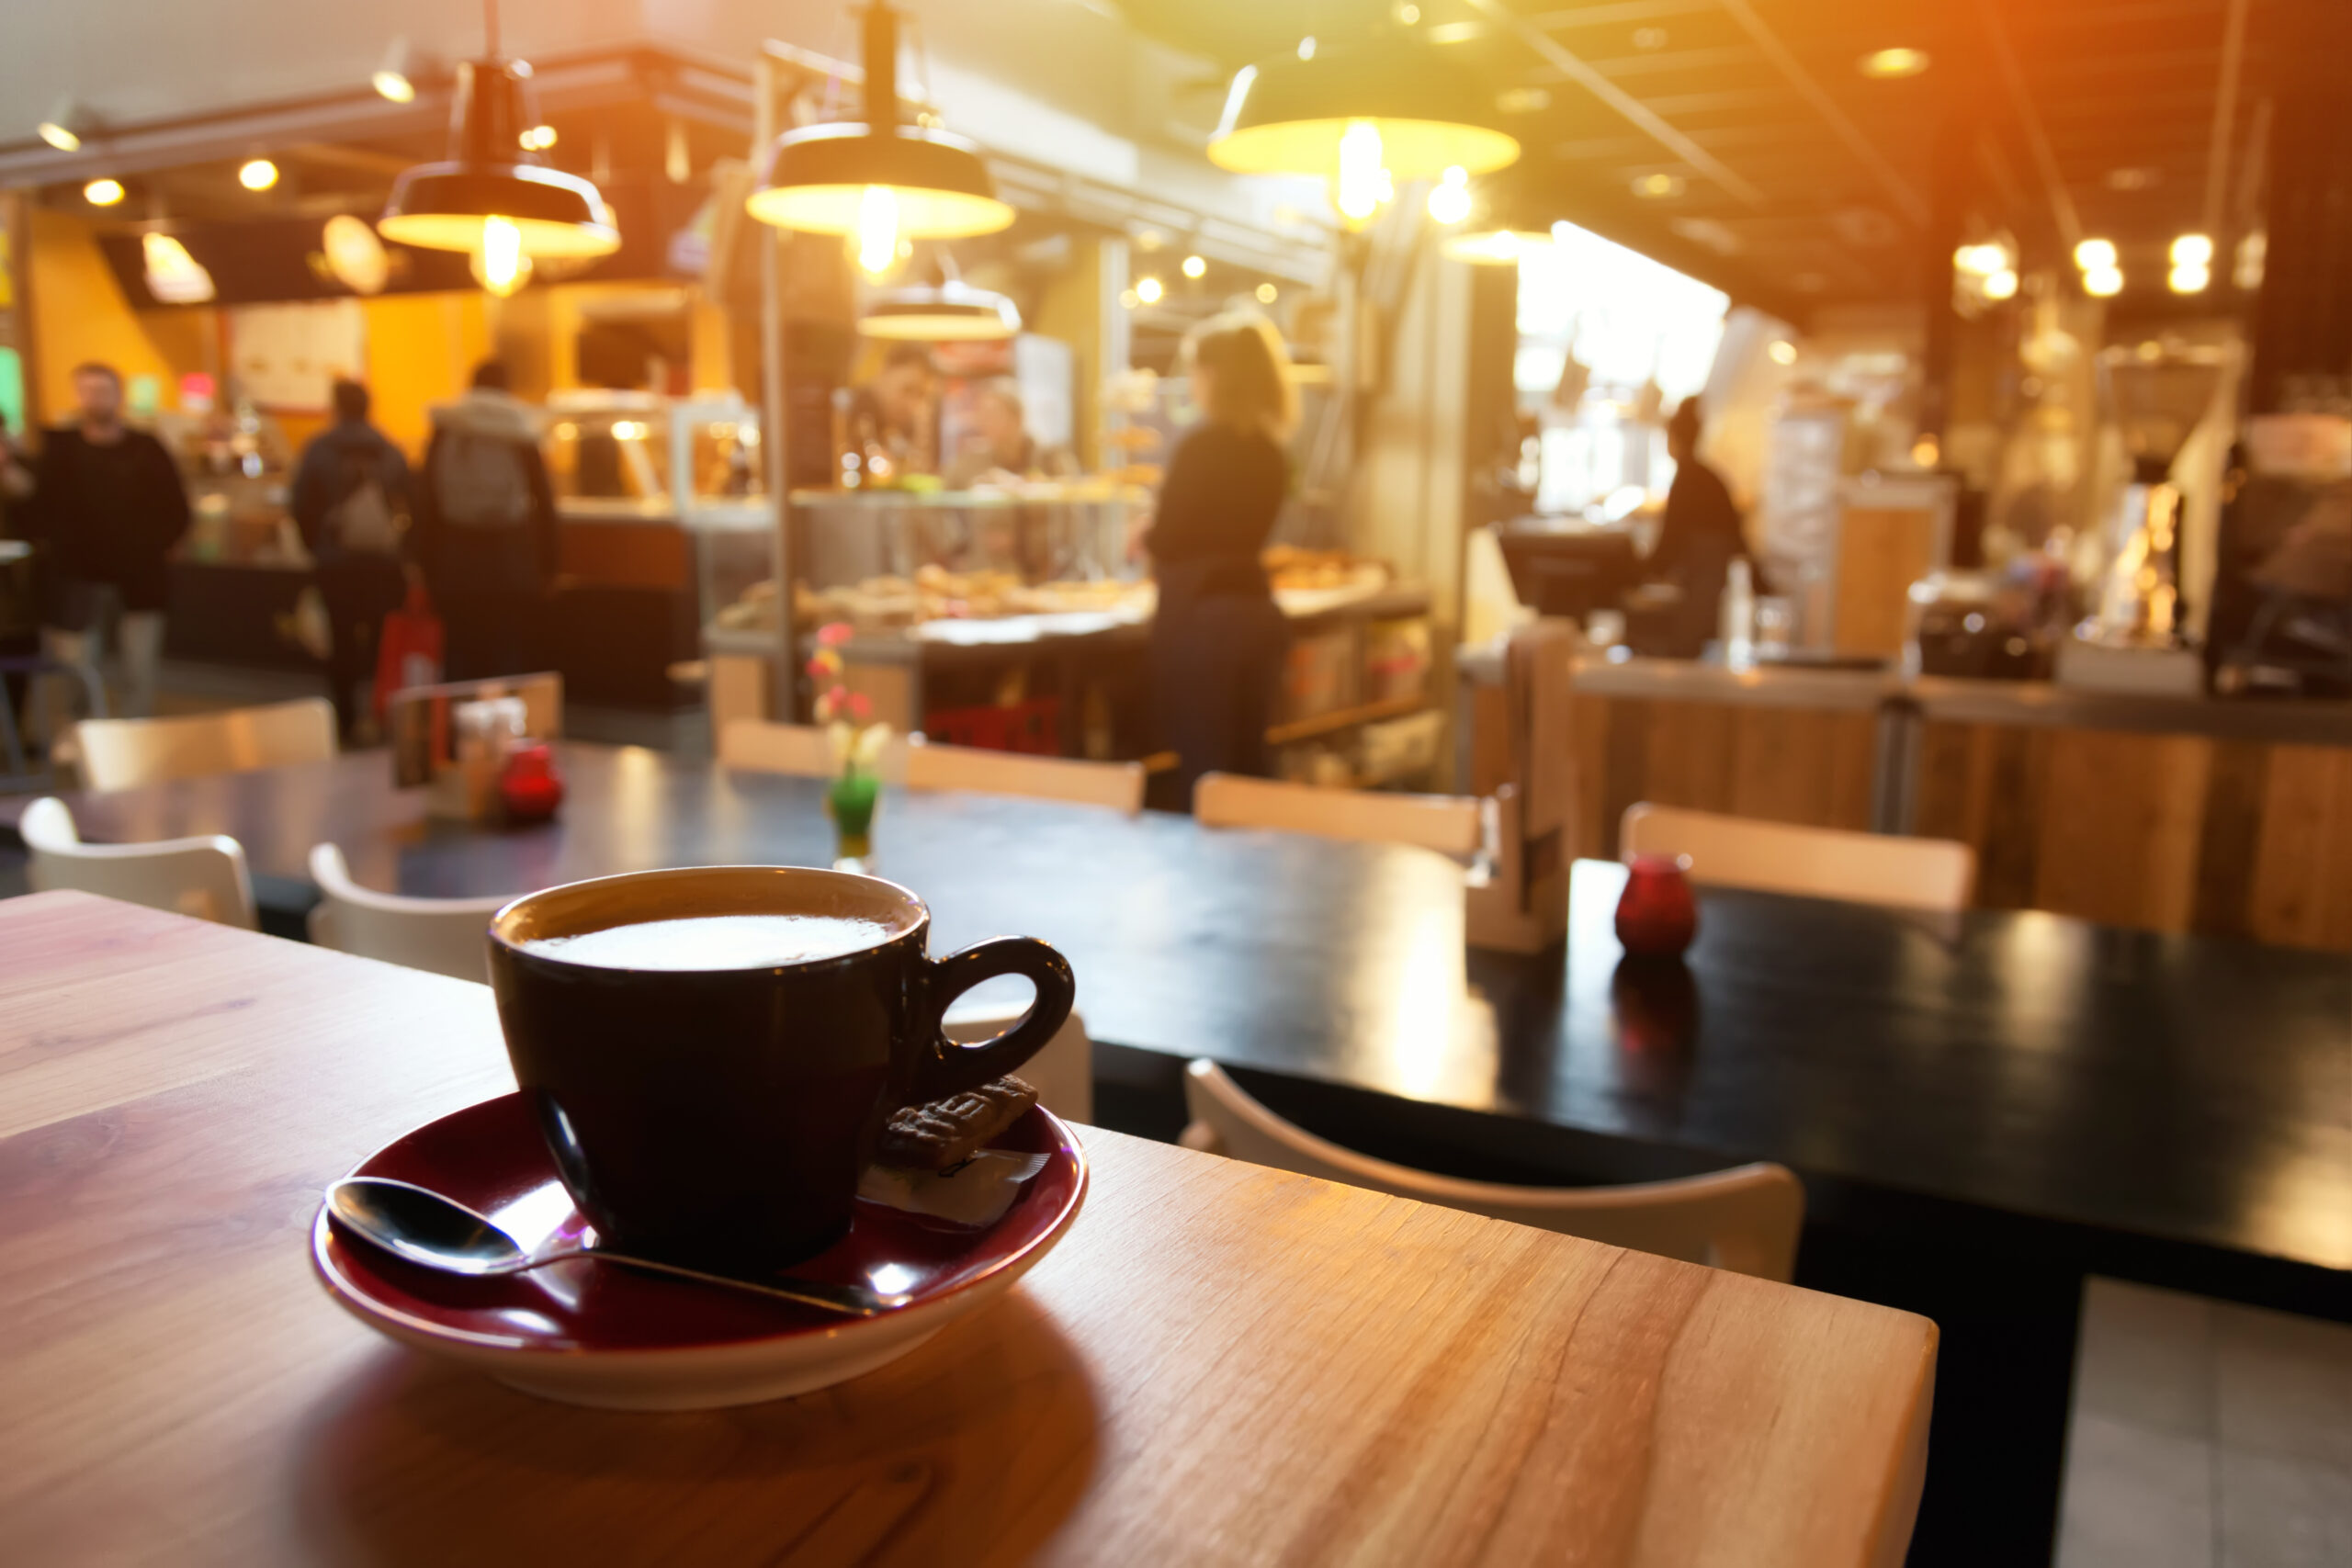 A coffee shop at sunset. The foreground is focused on a cappuccino; the background is blurred out of focus. People sit and talk.